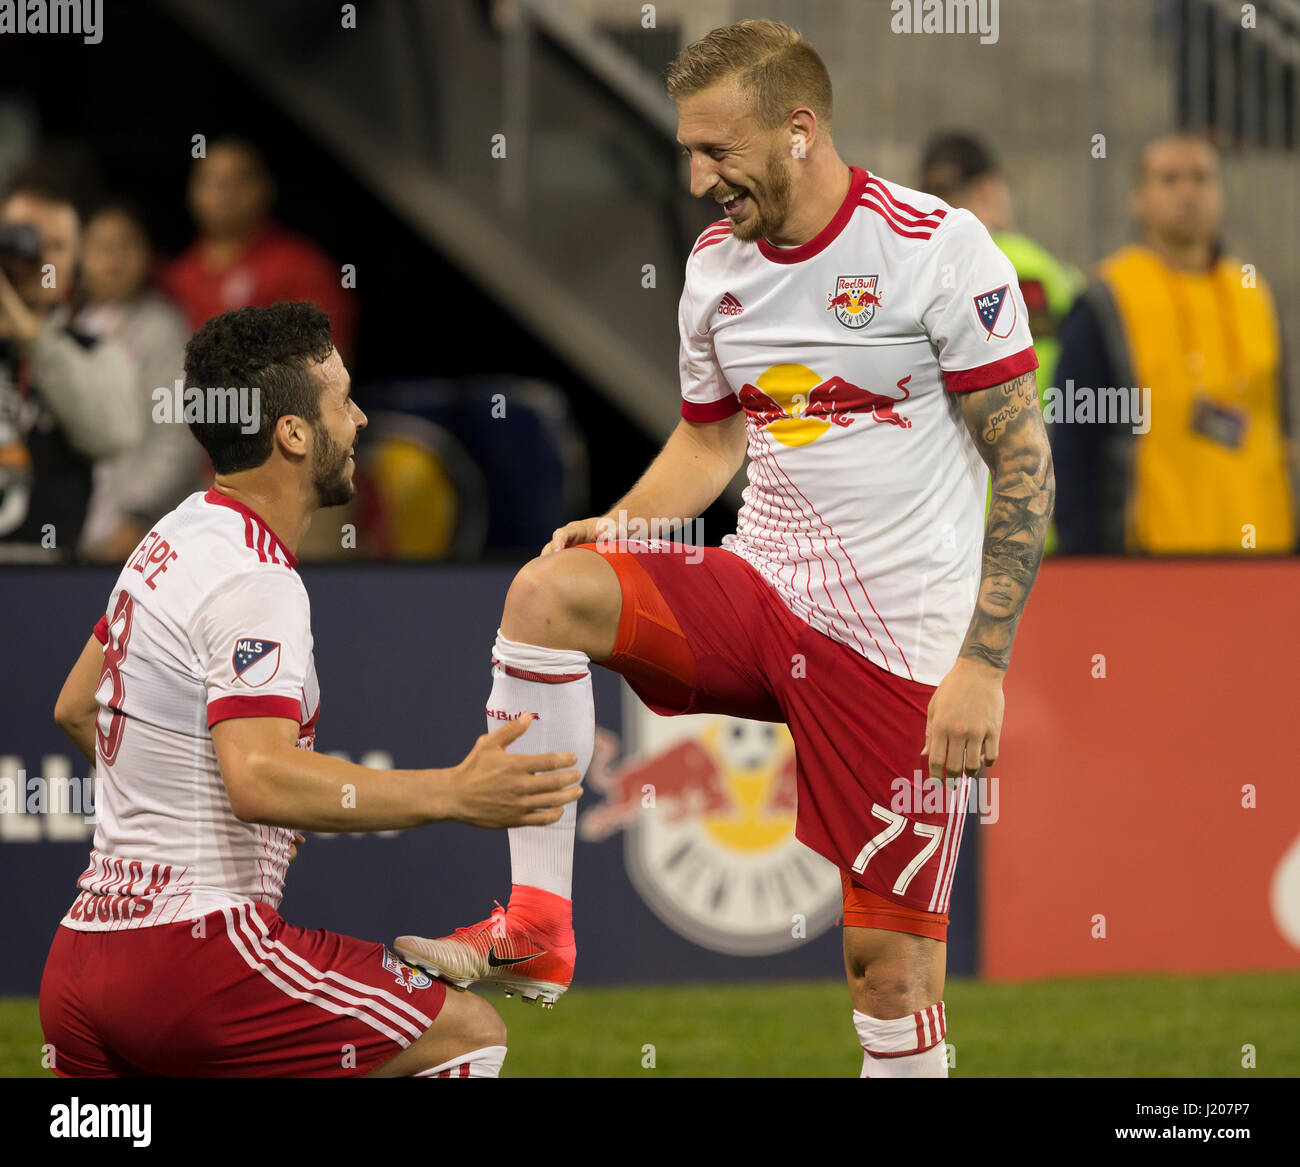 Daniel Royer (77) of Red Bulls celebrates scoring goal from penalty kick during MLS match against Columbus Crew SC on Red Bull arena Red Bulls won 2 - 0 (Photo by: Lev Radin/Pacific Press) Stock Photo